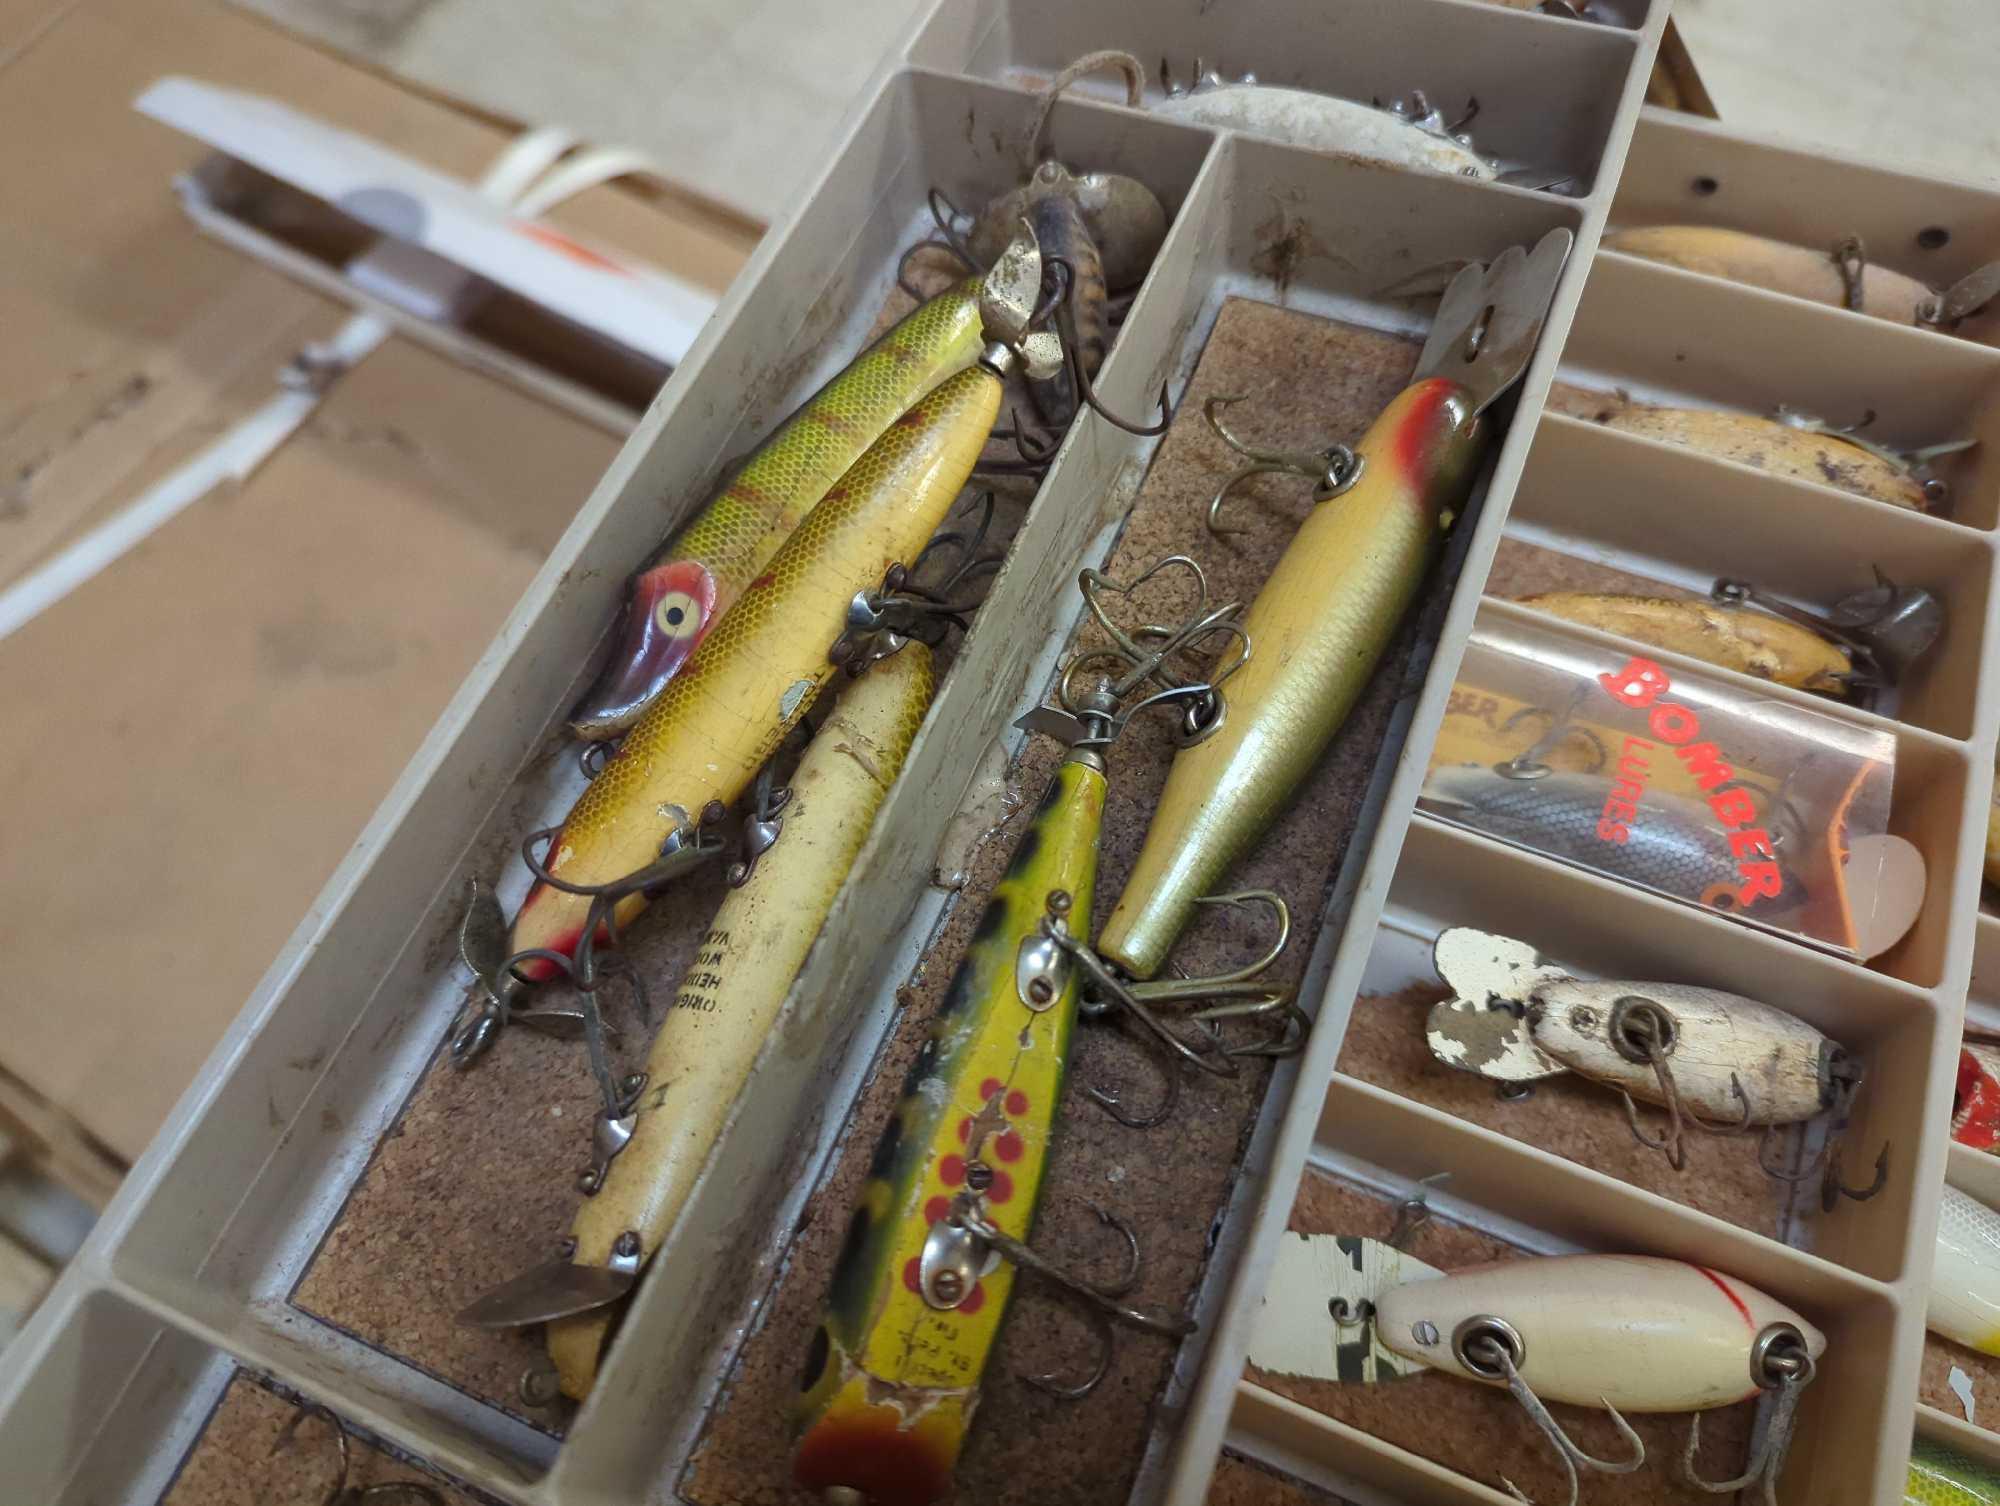 Large tackle box and contents including various fishing lures of similar style. Comes as is shown in